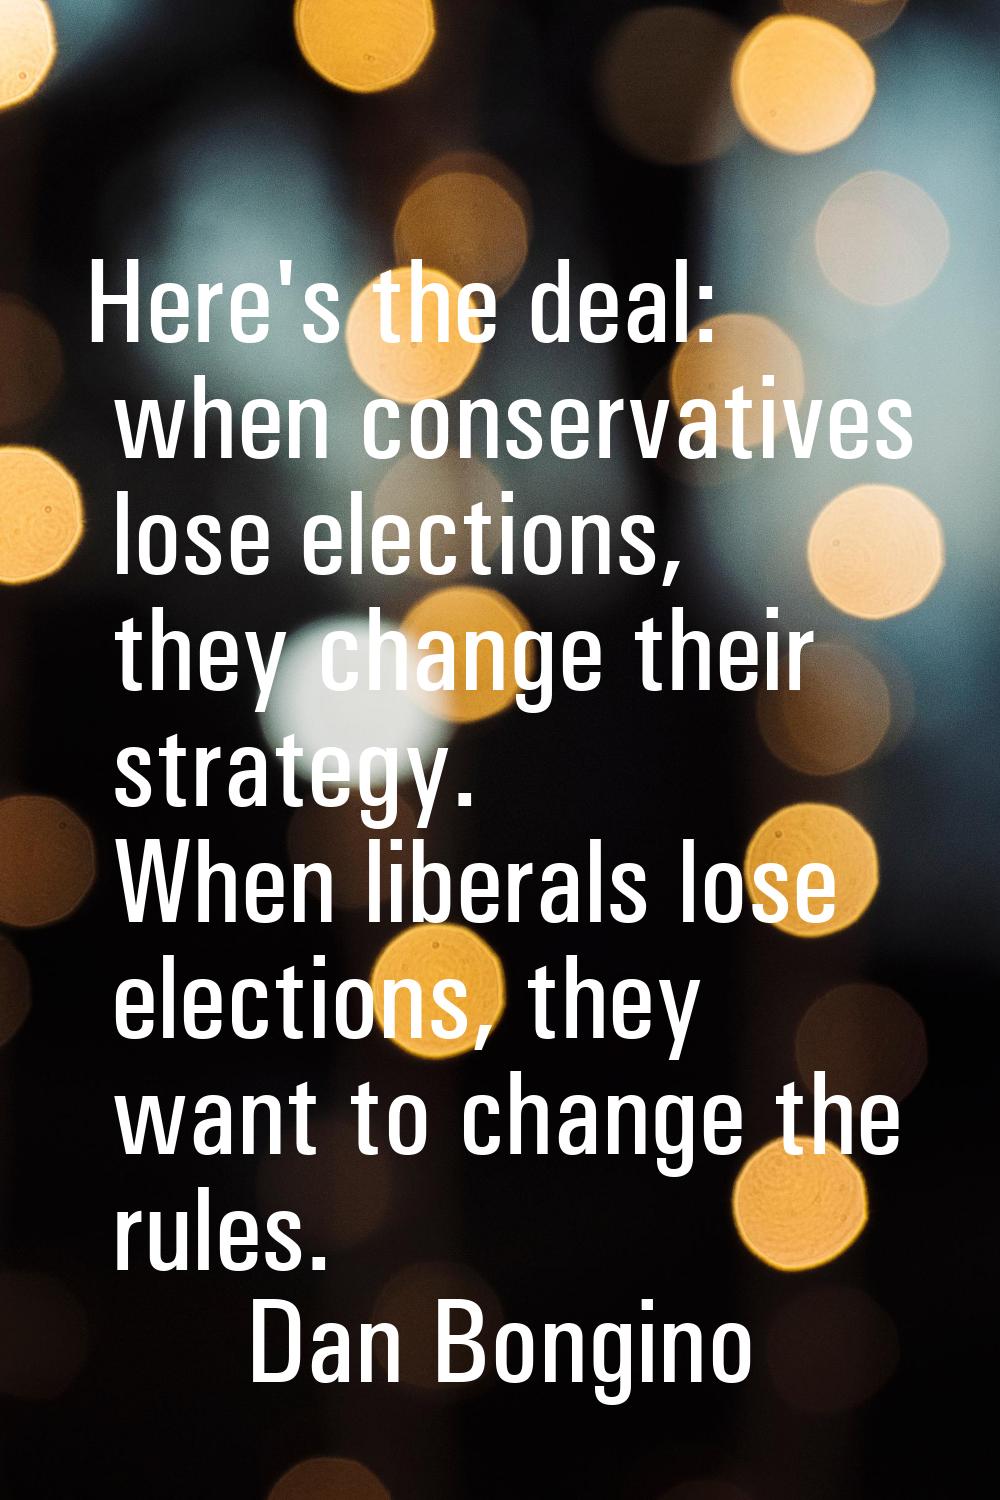 Here's the deal: when conservatives lose elections, they change their strategy. When liberals lose 